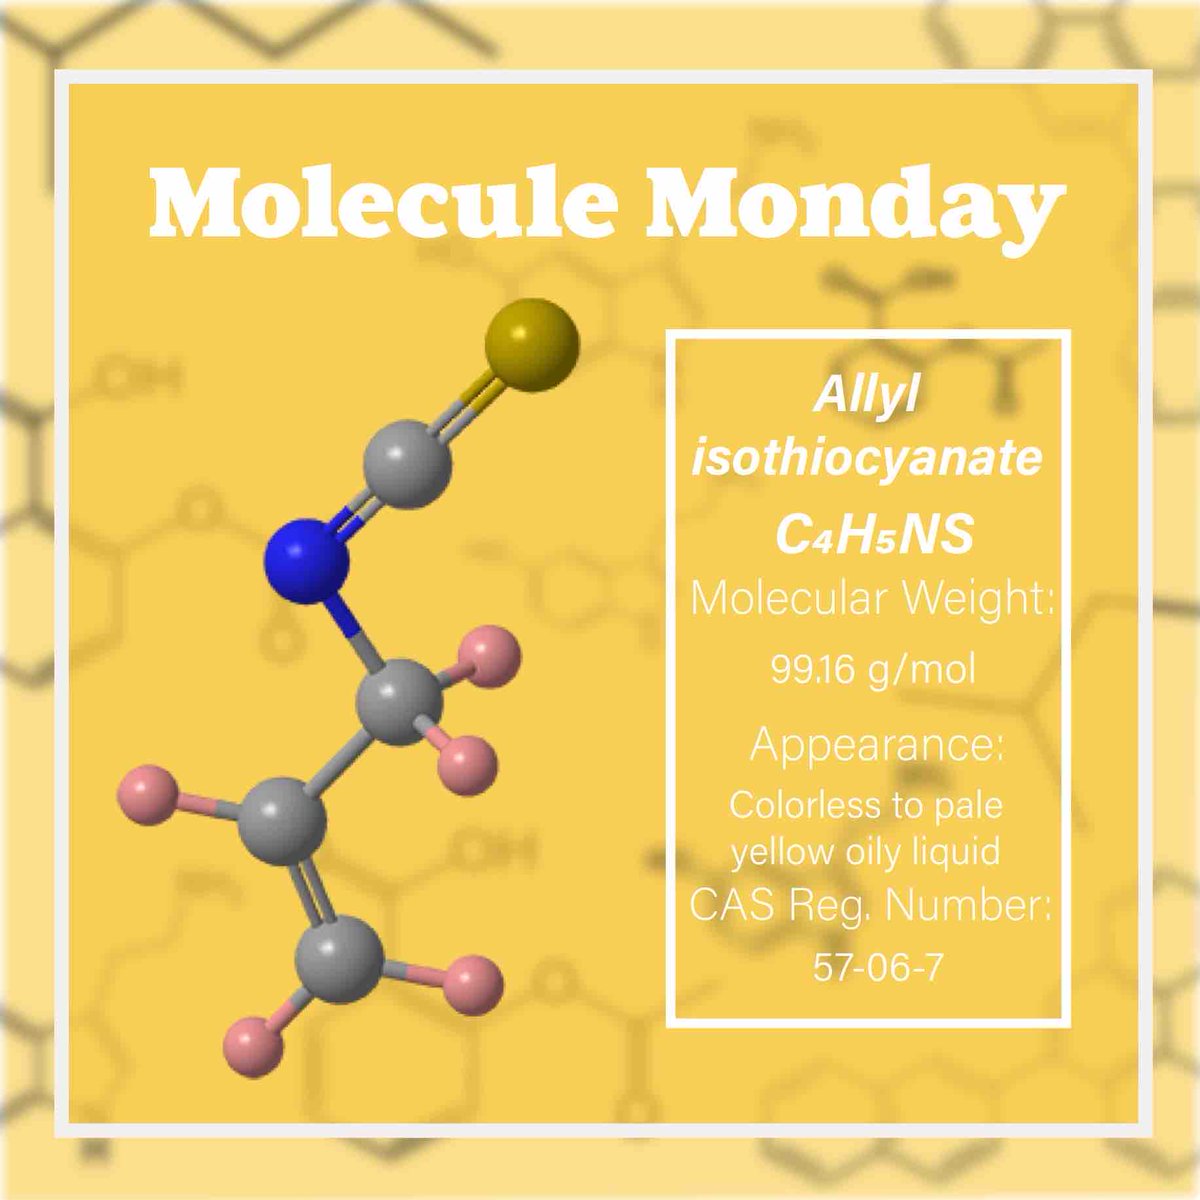 Do you know about allyl isothiocynate, a molecule that can be enjoyed in food, but should be avoided otherwise? Learn more about this molecule at acs.org/molecule-of-th…. Images used in this post are from asc.org.